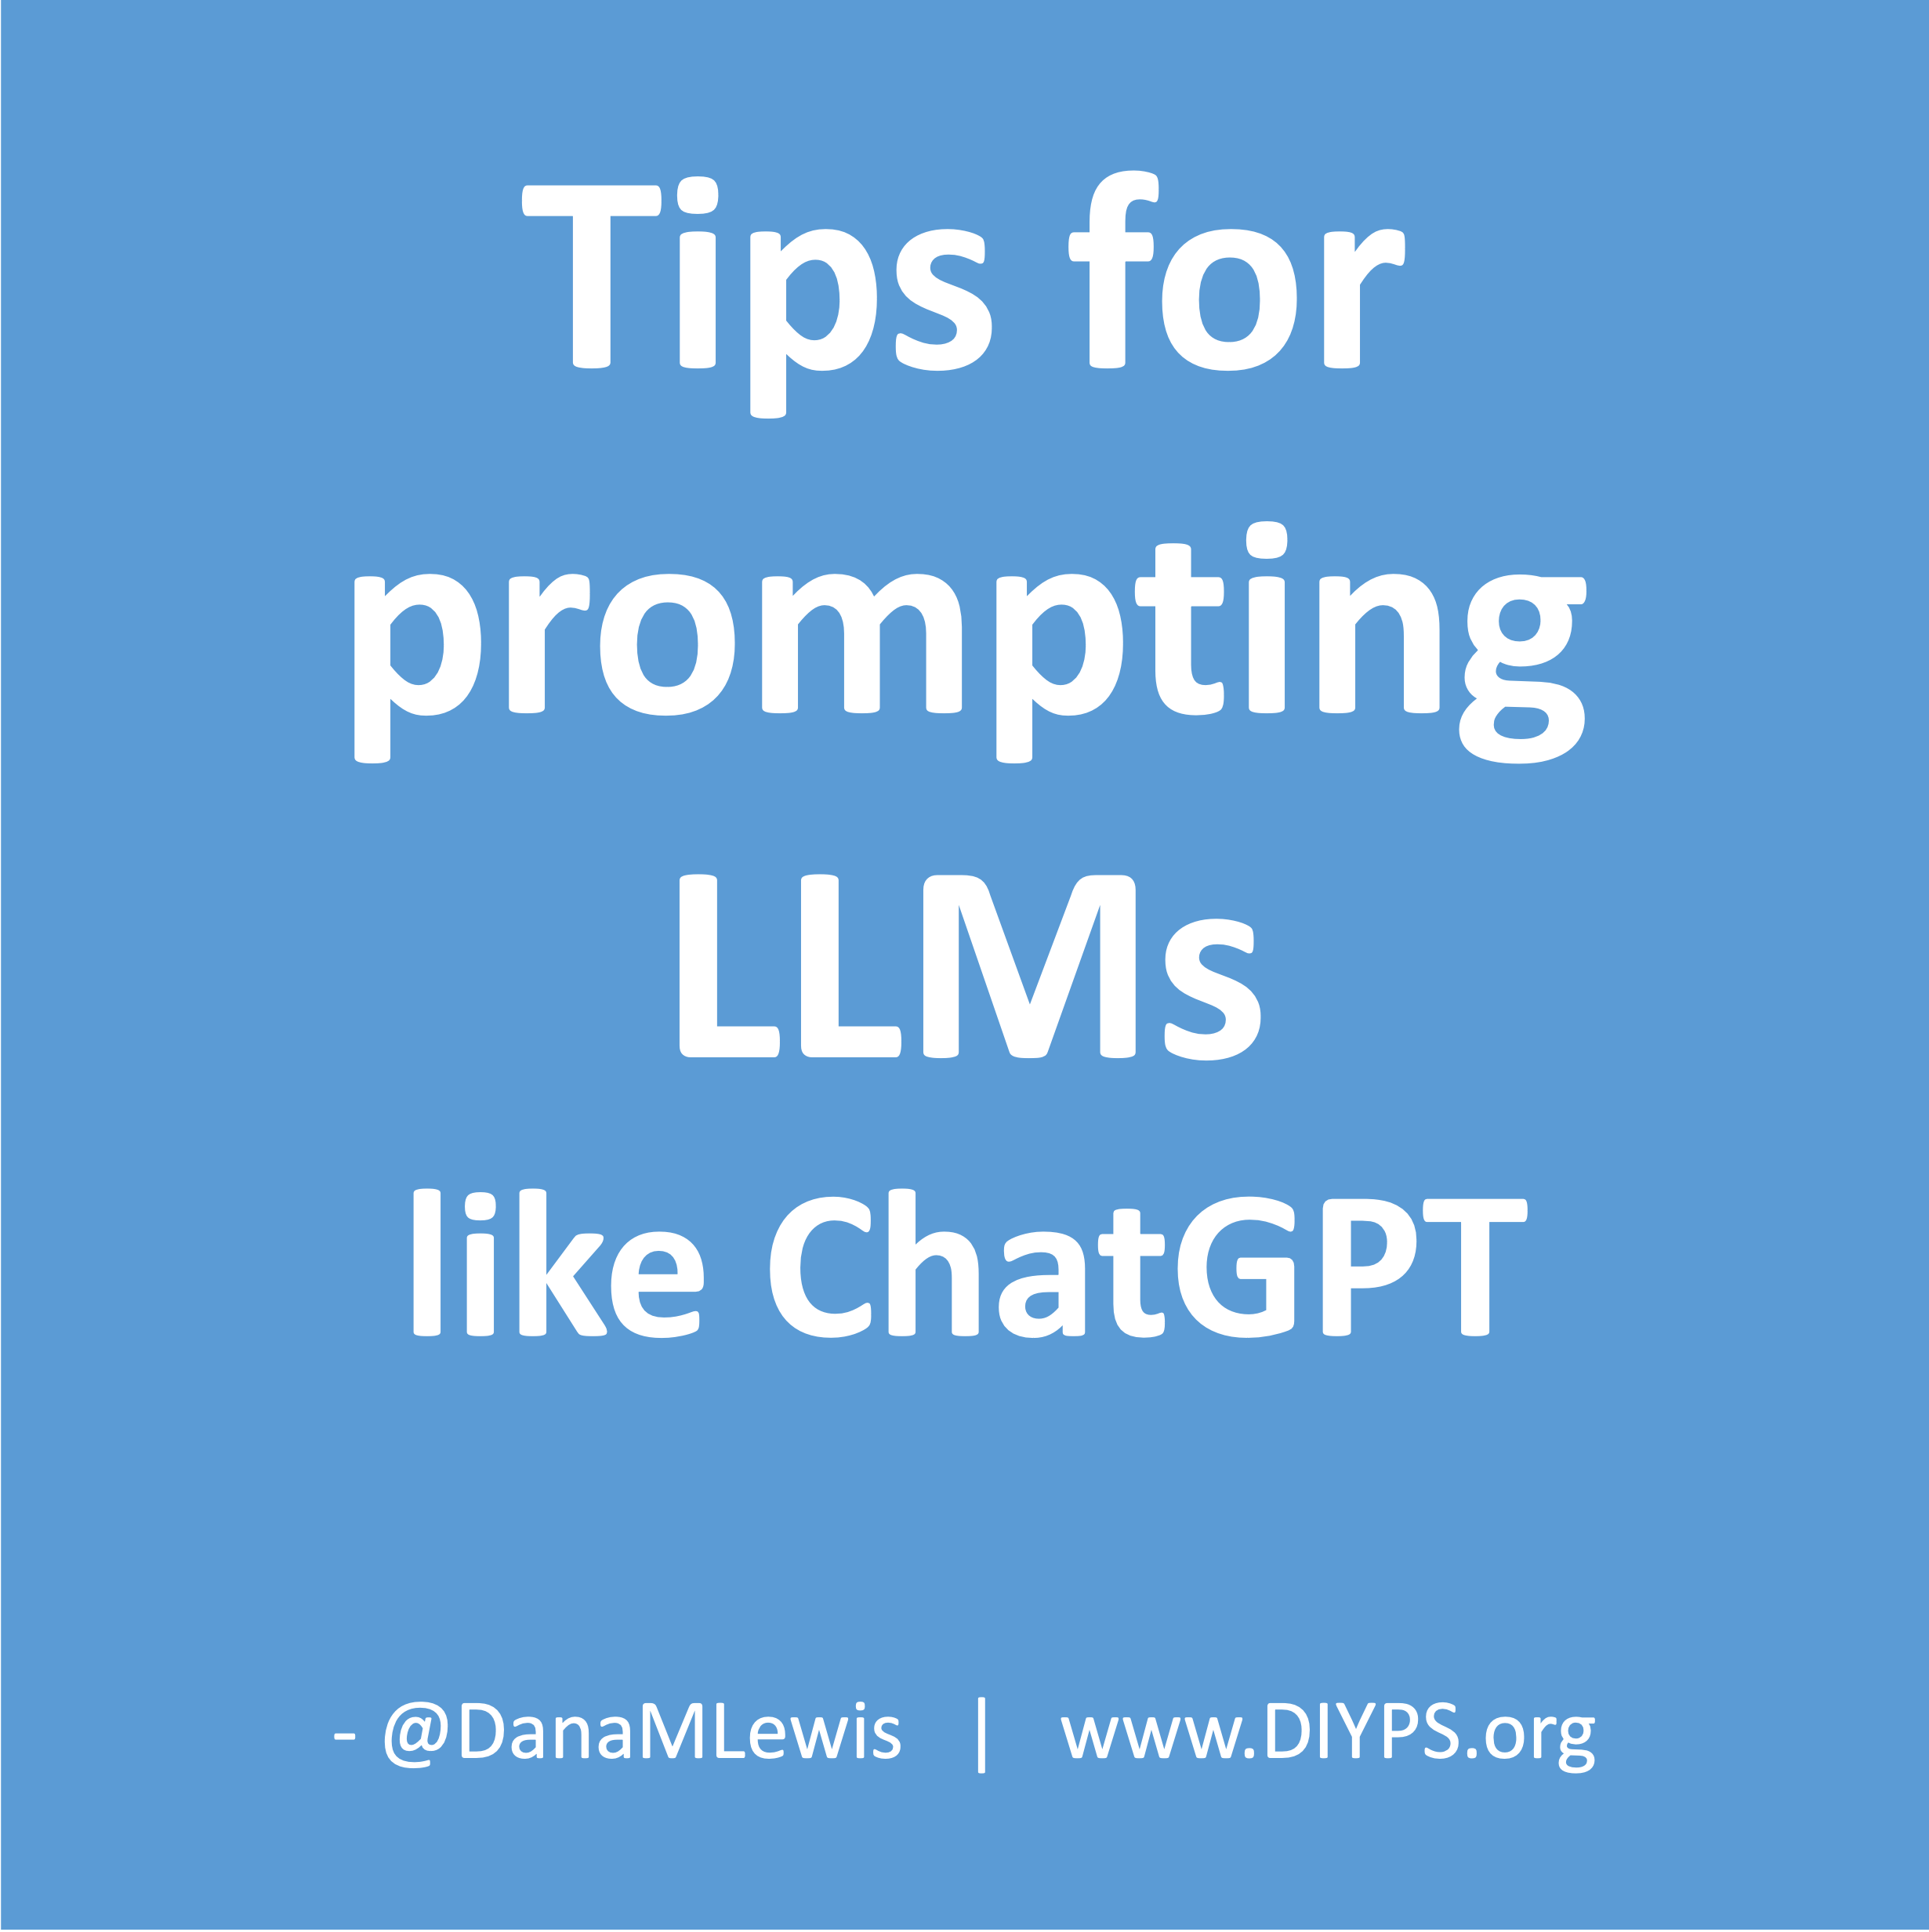 Tips for prompting LLMs like ChatGPT, written by Dana M. Lewis and available from DIYPS.org